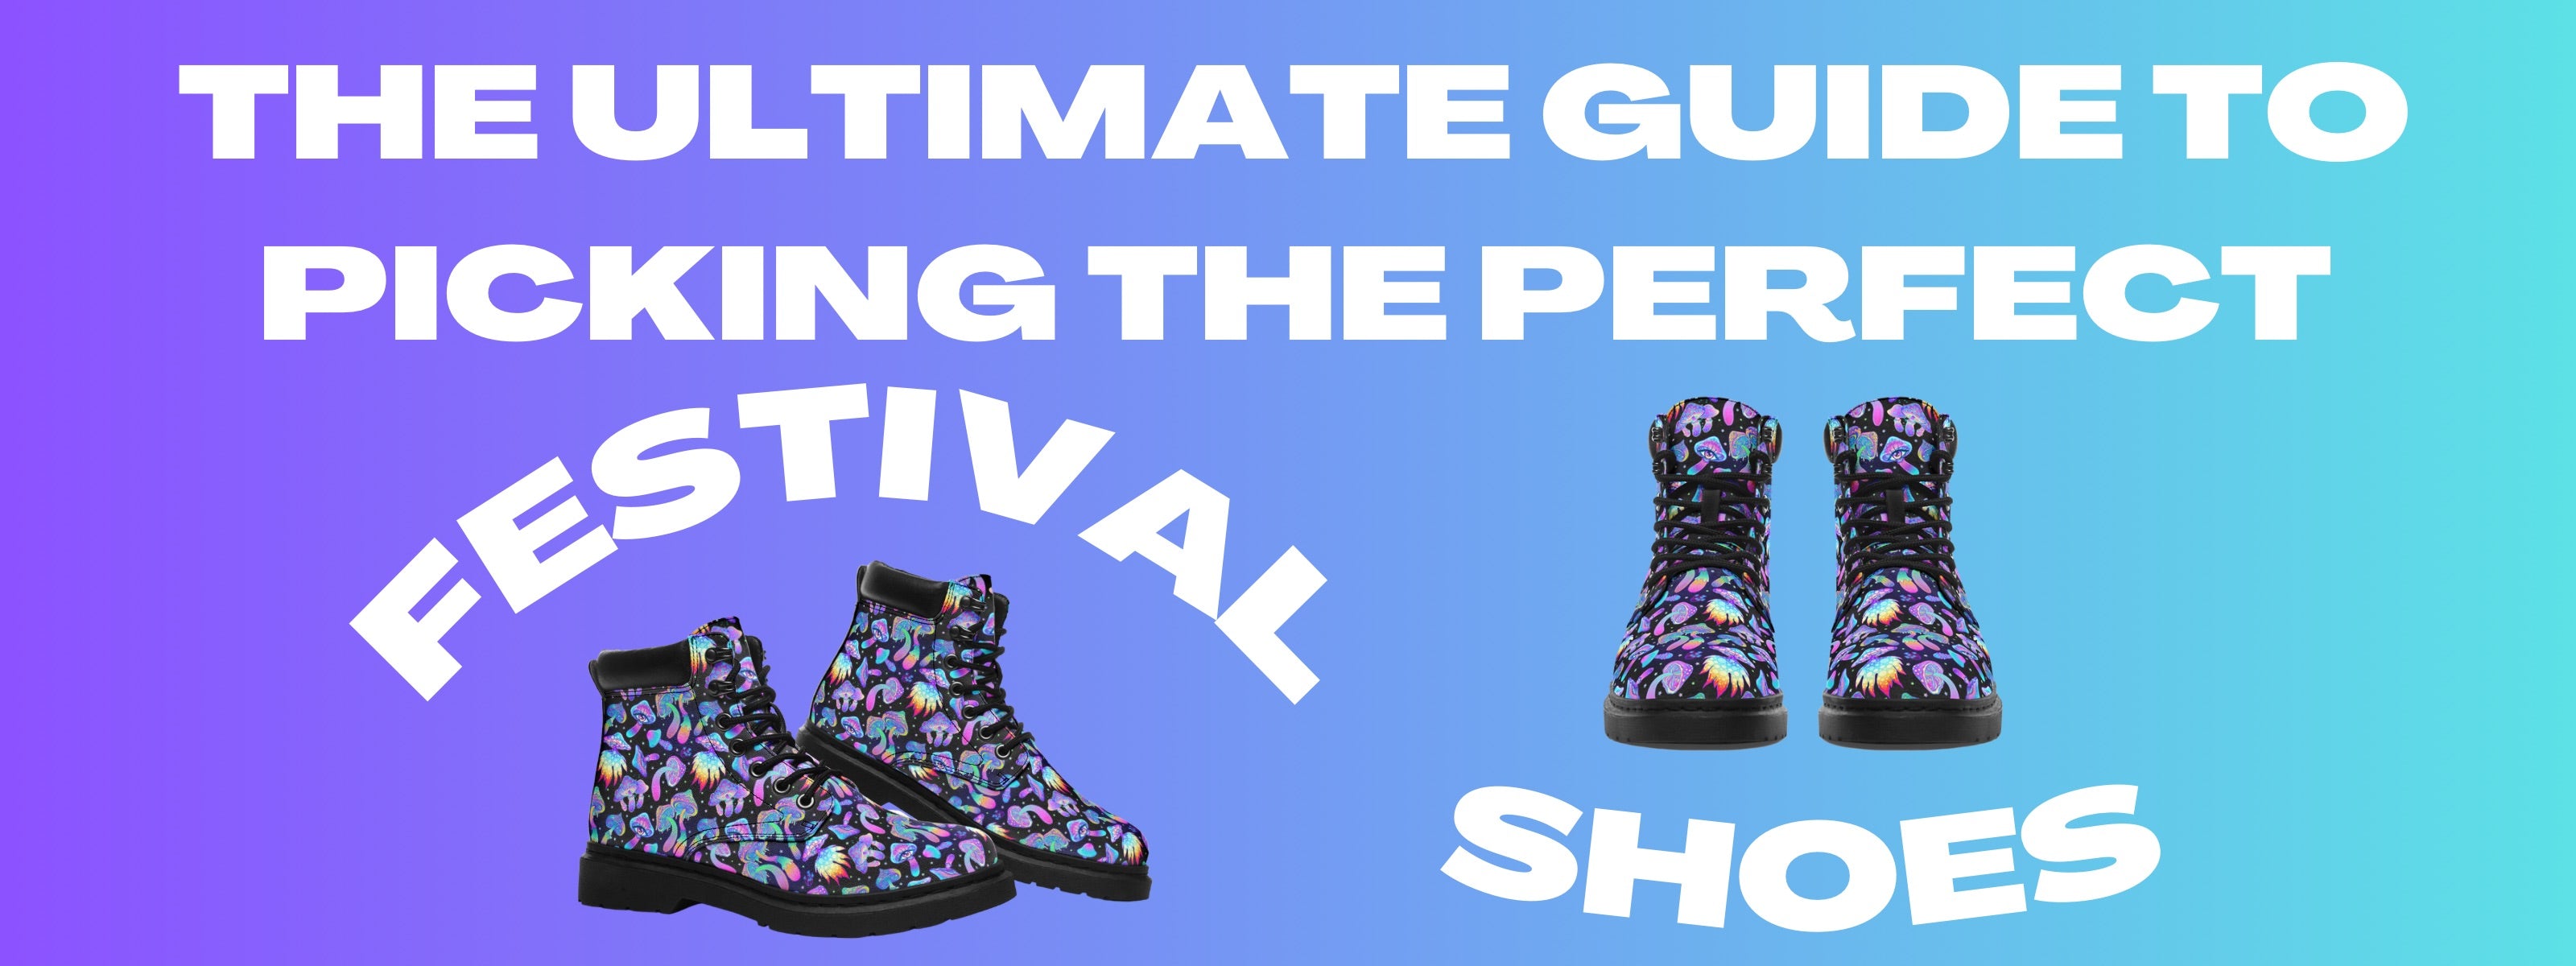 Find Your Groove: The Ultimate Guide to Picking the Perfect Rave and Festival Shoes